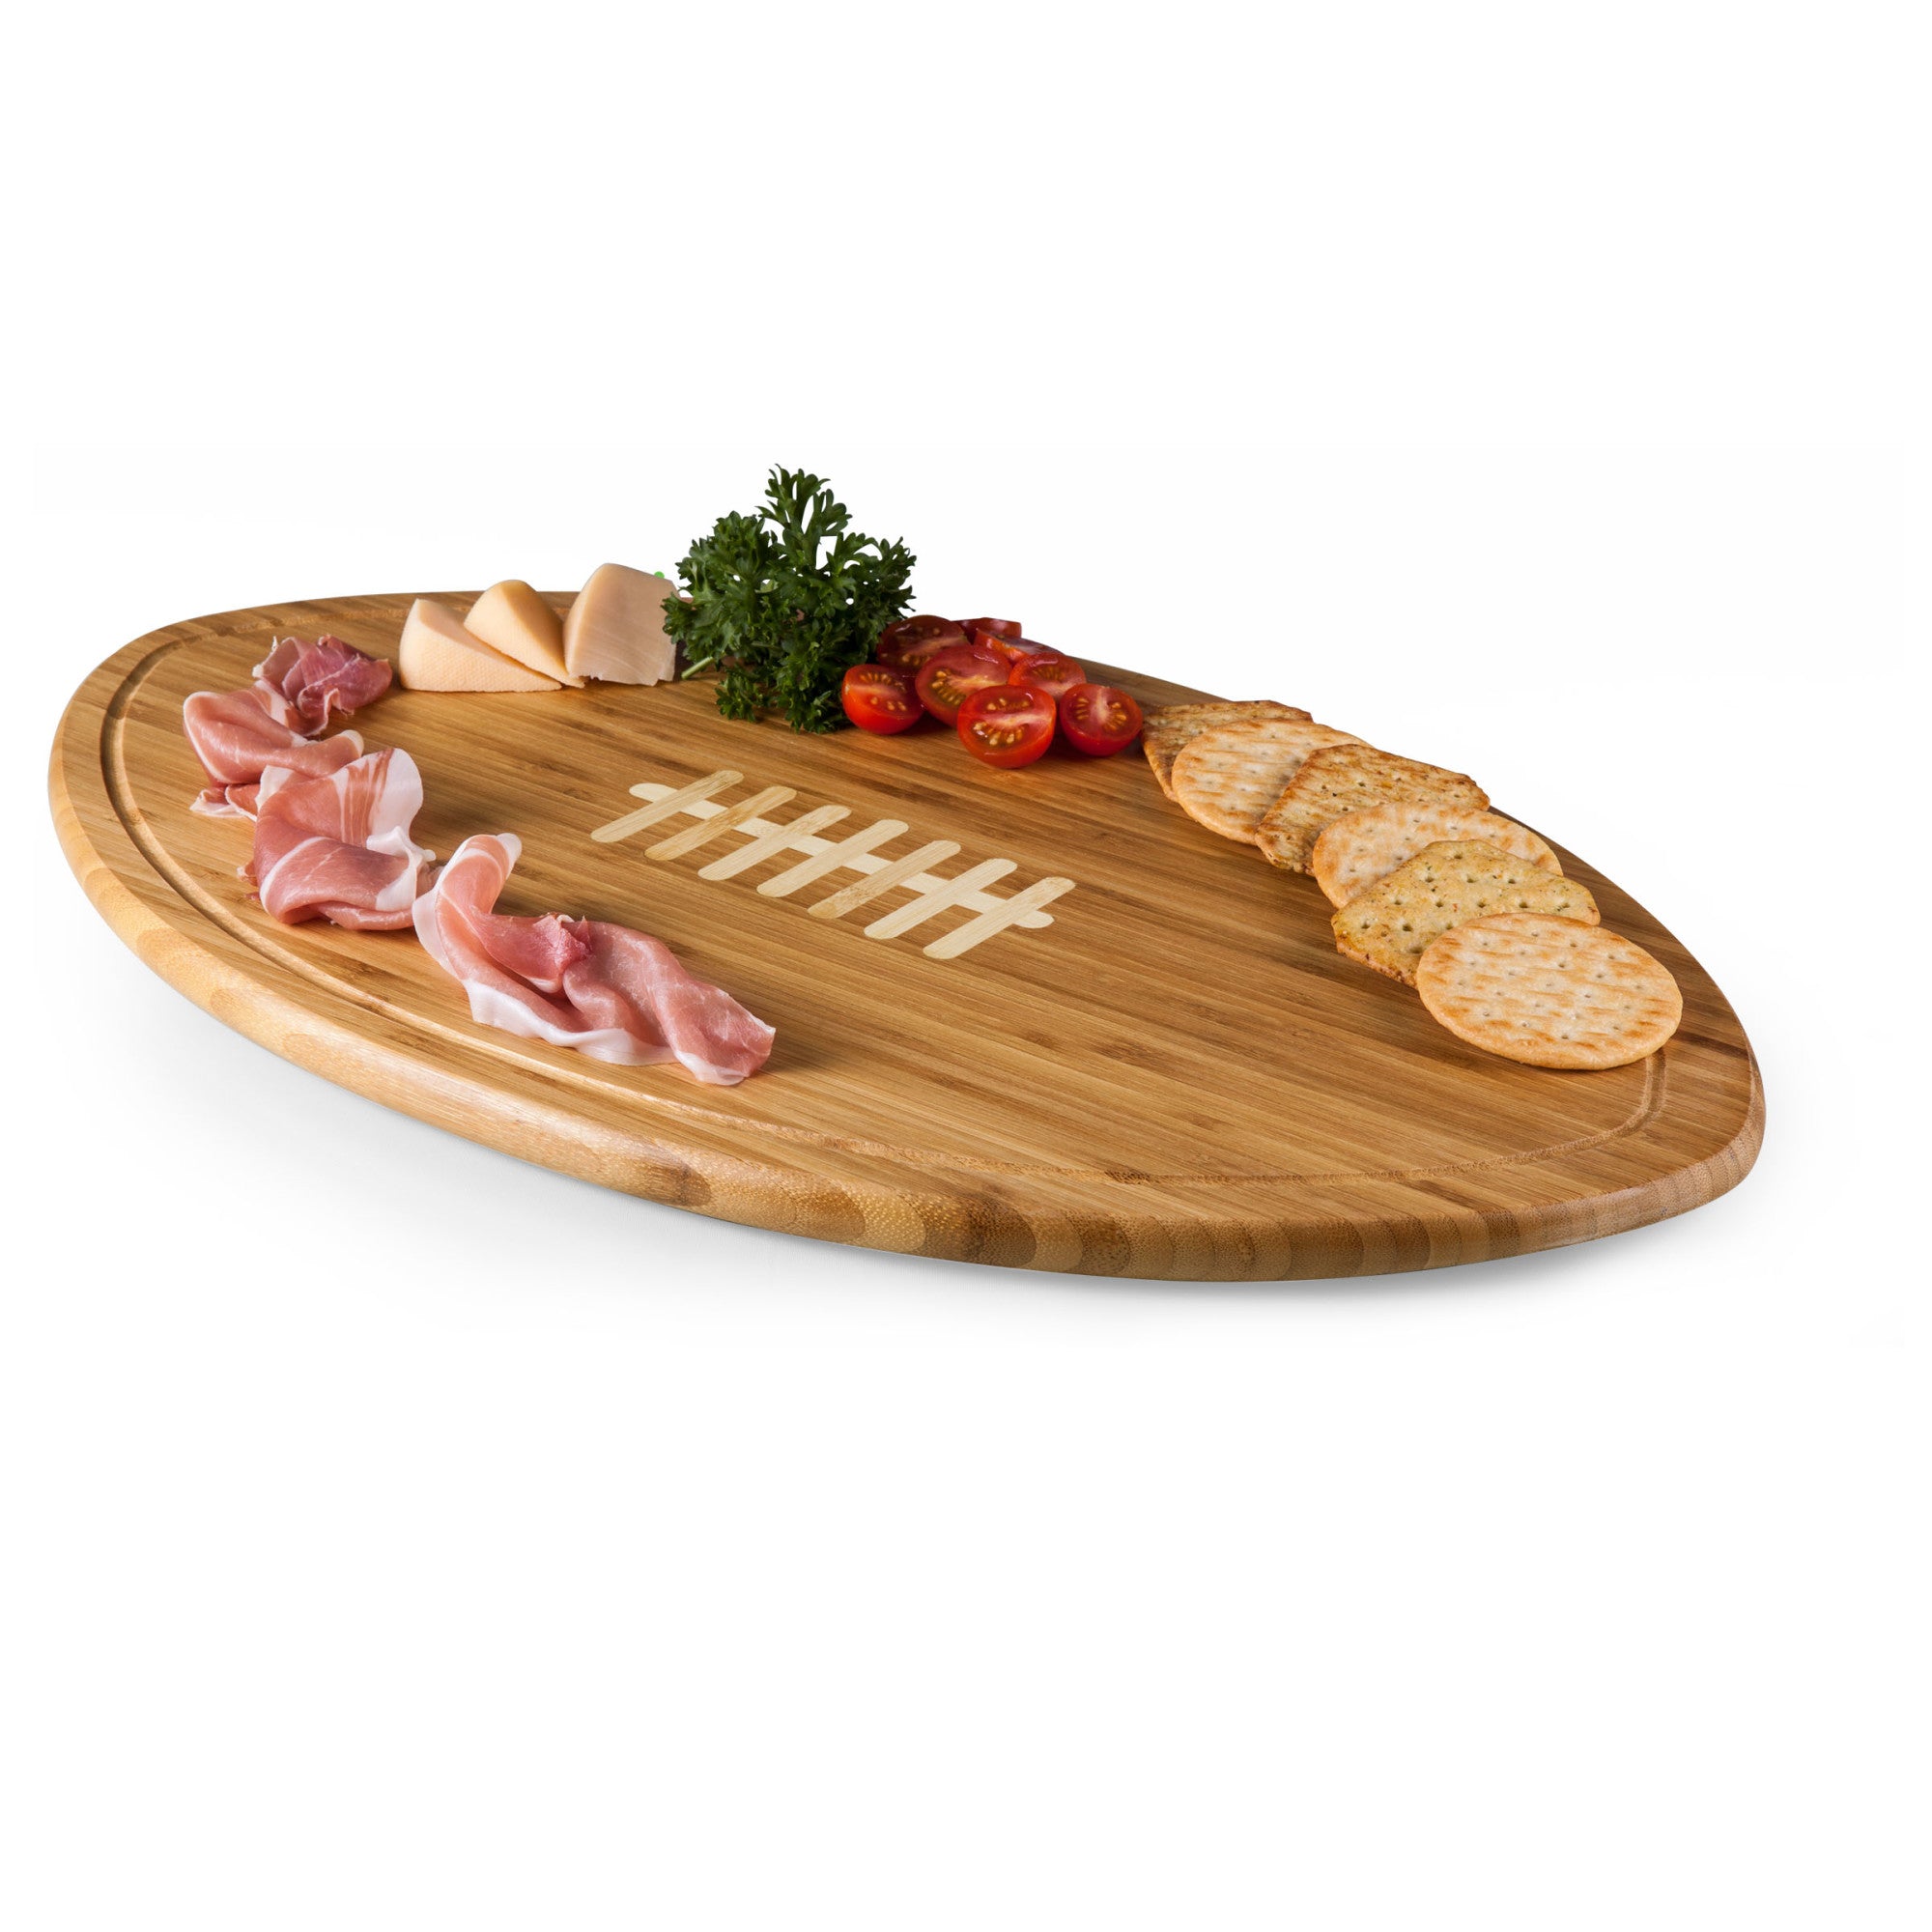 NC State Wolfpack - Kickoff Football Cutting Board & Serving Tray